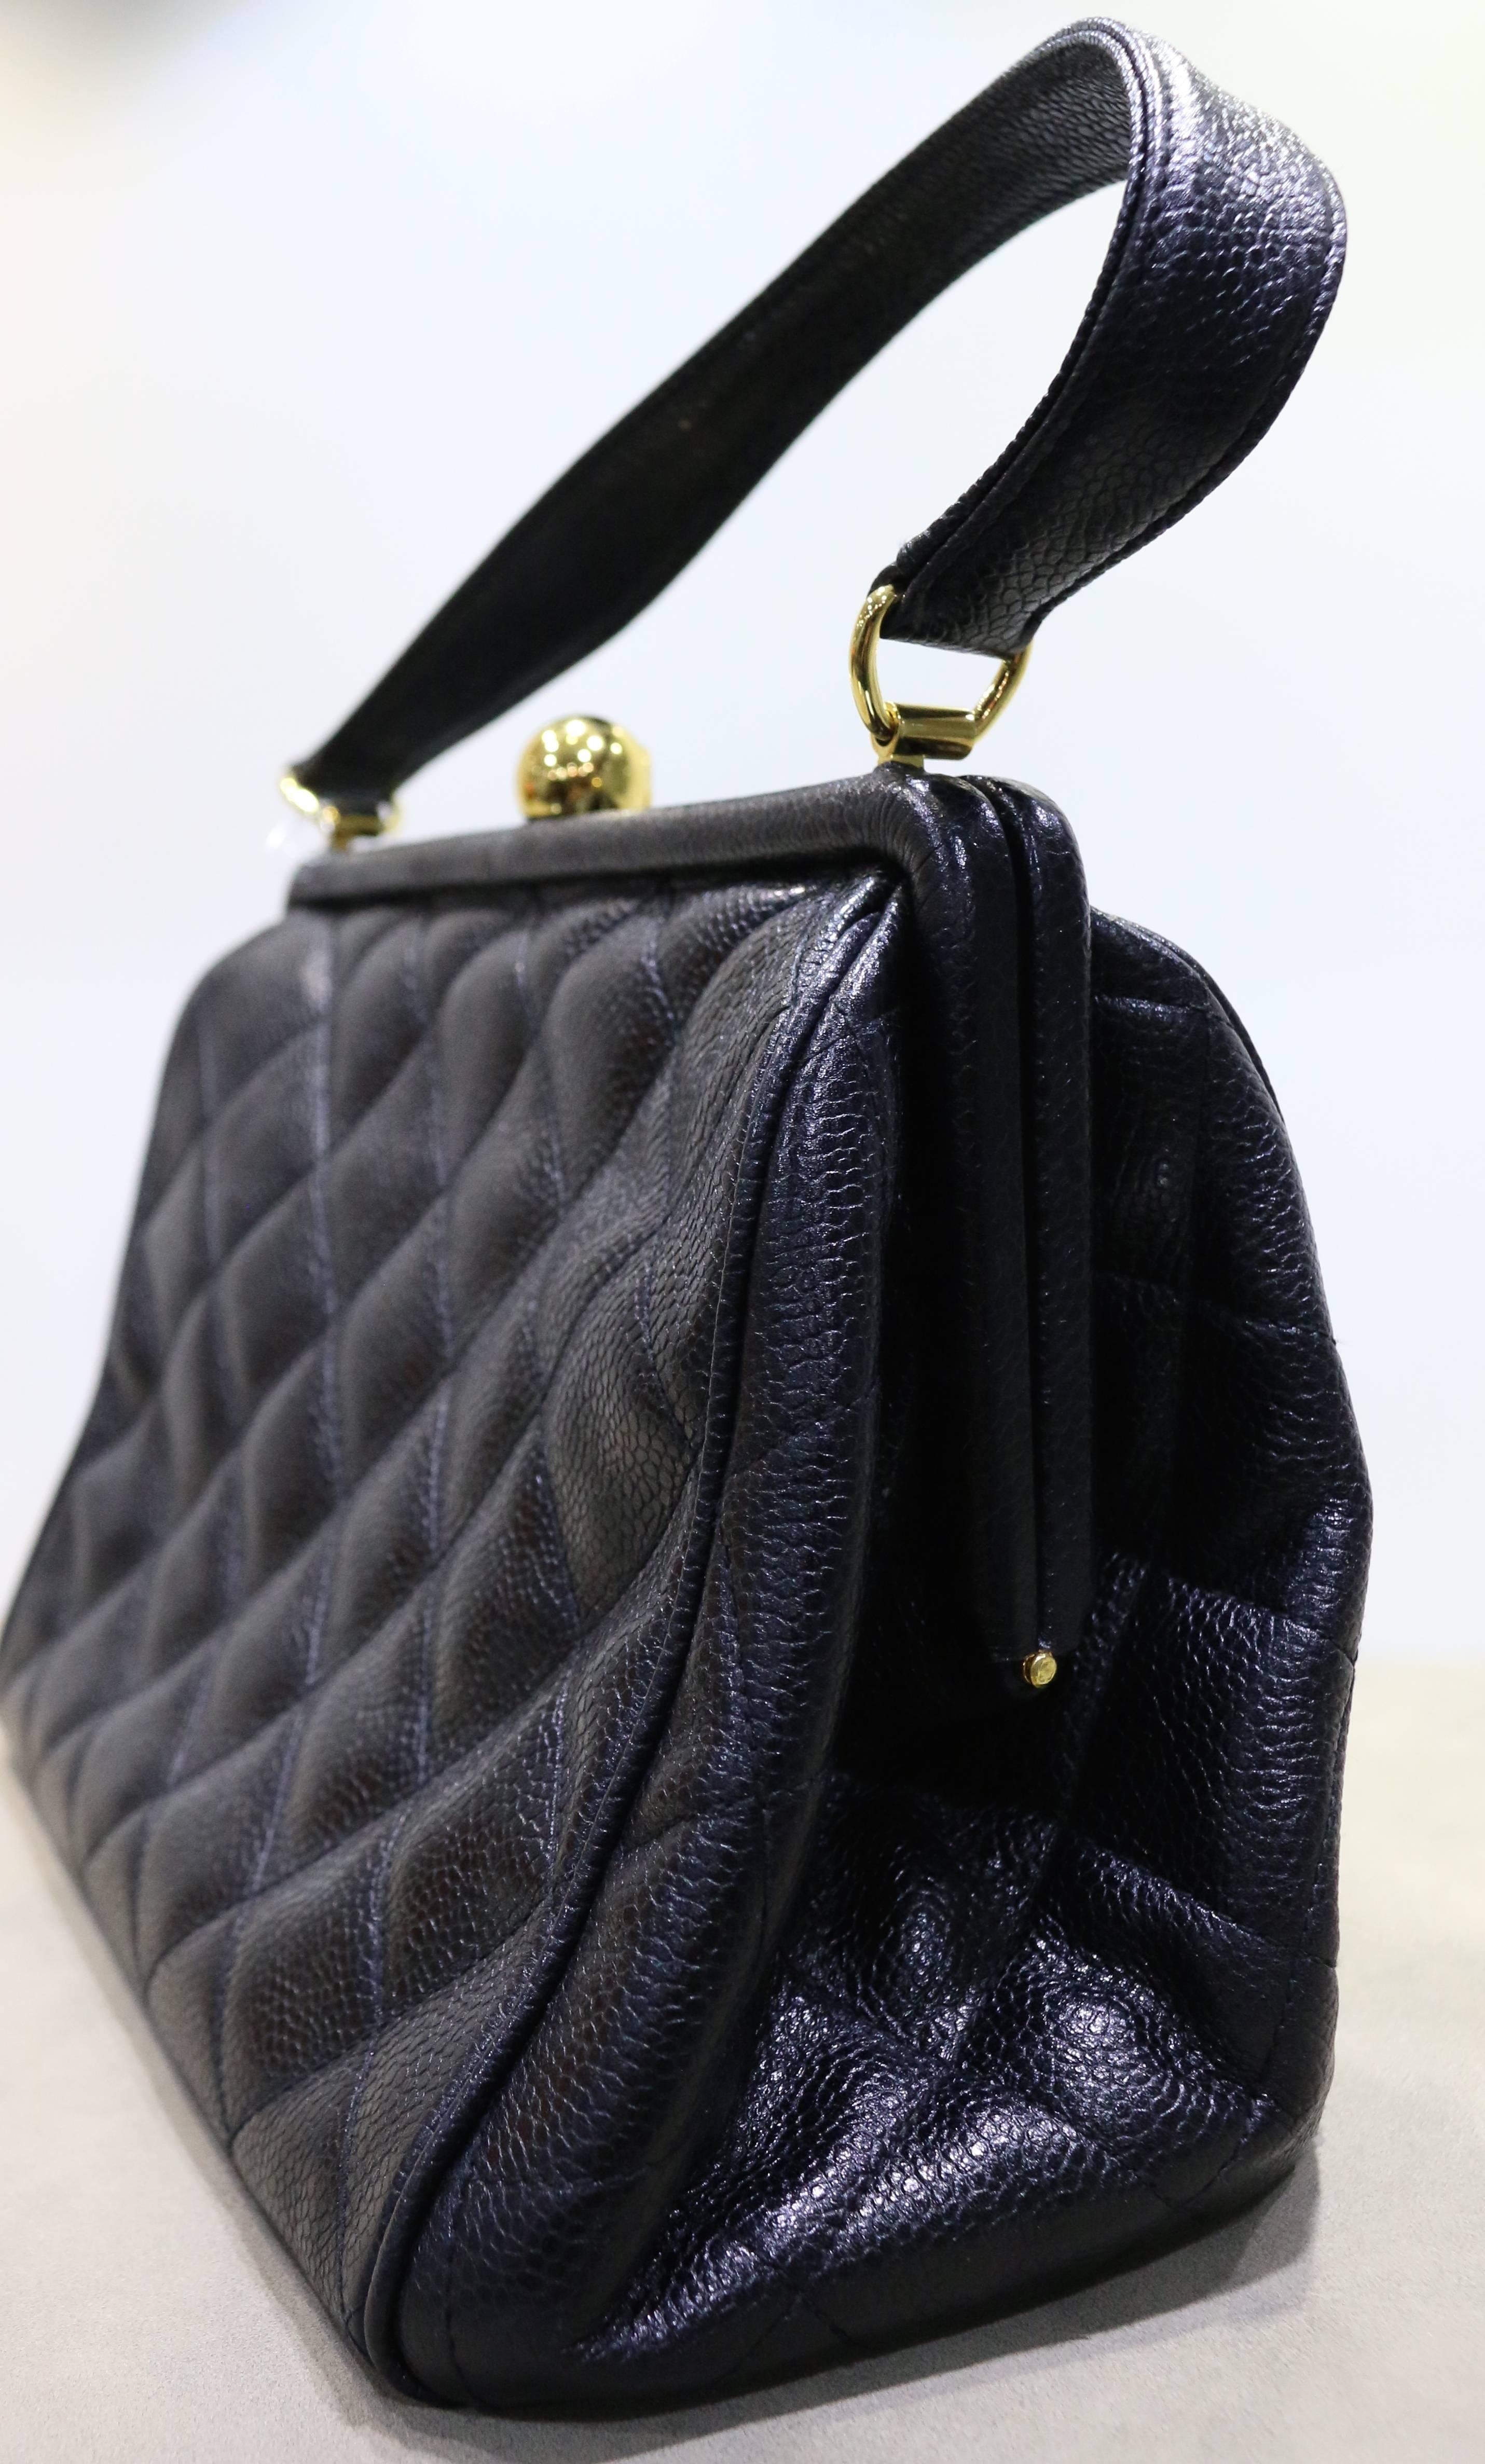 - Vintage 90s Chanel black quilted leather handbag.

- Hinges open with dome shape CC clasp. 

- Embroidered "CC" logo on bottom. 

- Height : 7 inches. Handle: 6 inches. Length: 8.8 inches. Width: 4.35 inches. 

- Includes: Authenticity